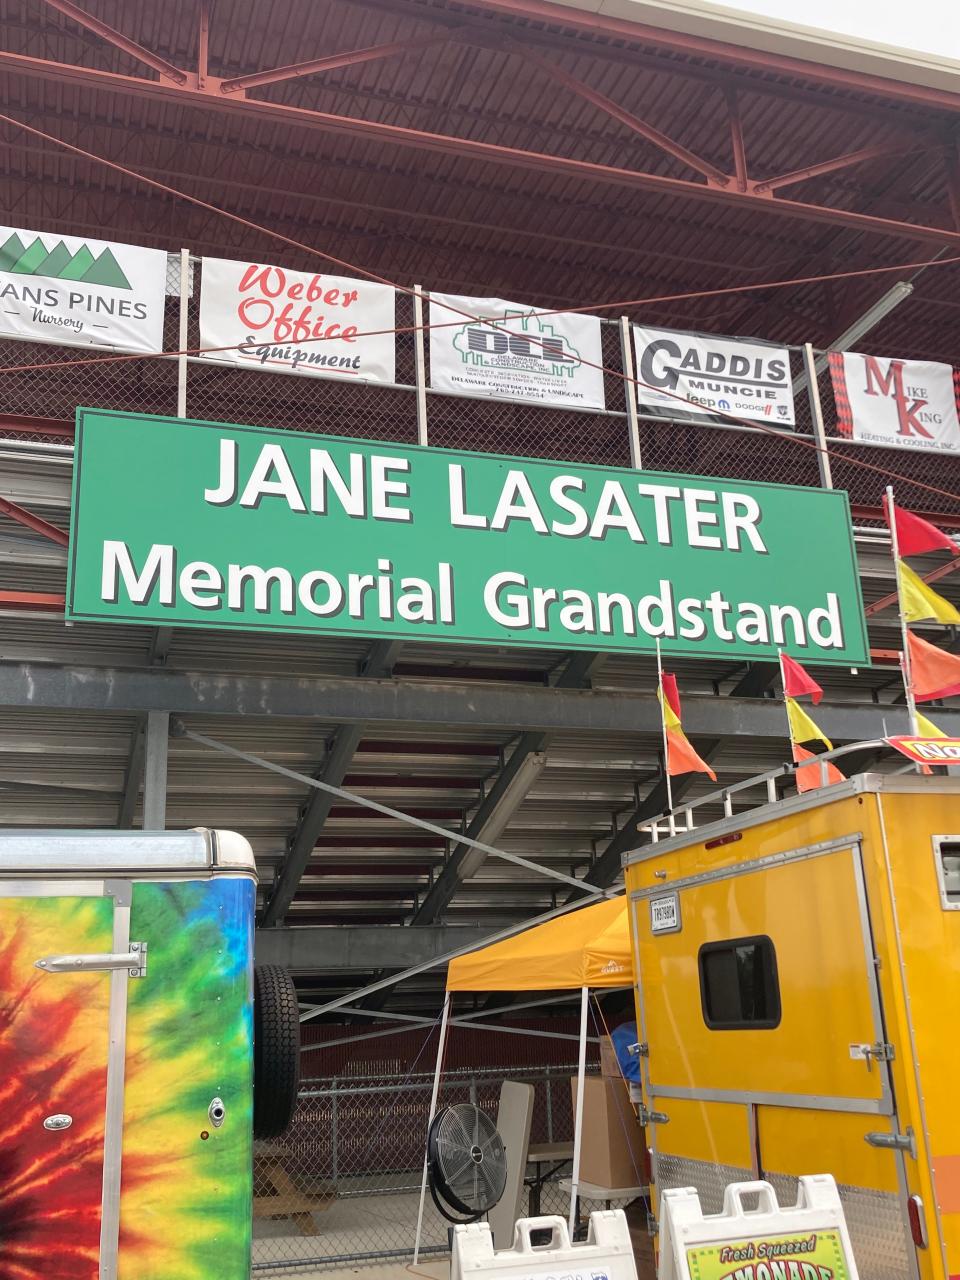 On Saturday the grandstand at the Delaware County Fairgrounds was named in honor of the late Jane Lasater, who spent decades in local elected office and also on the Fair Board of directors prior to her death in April.